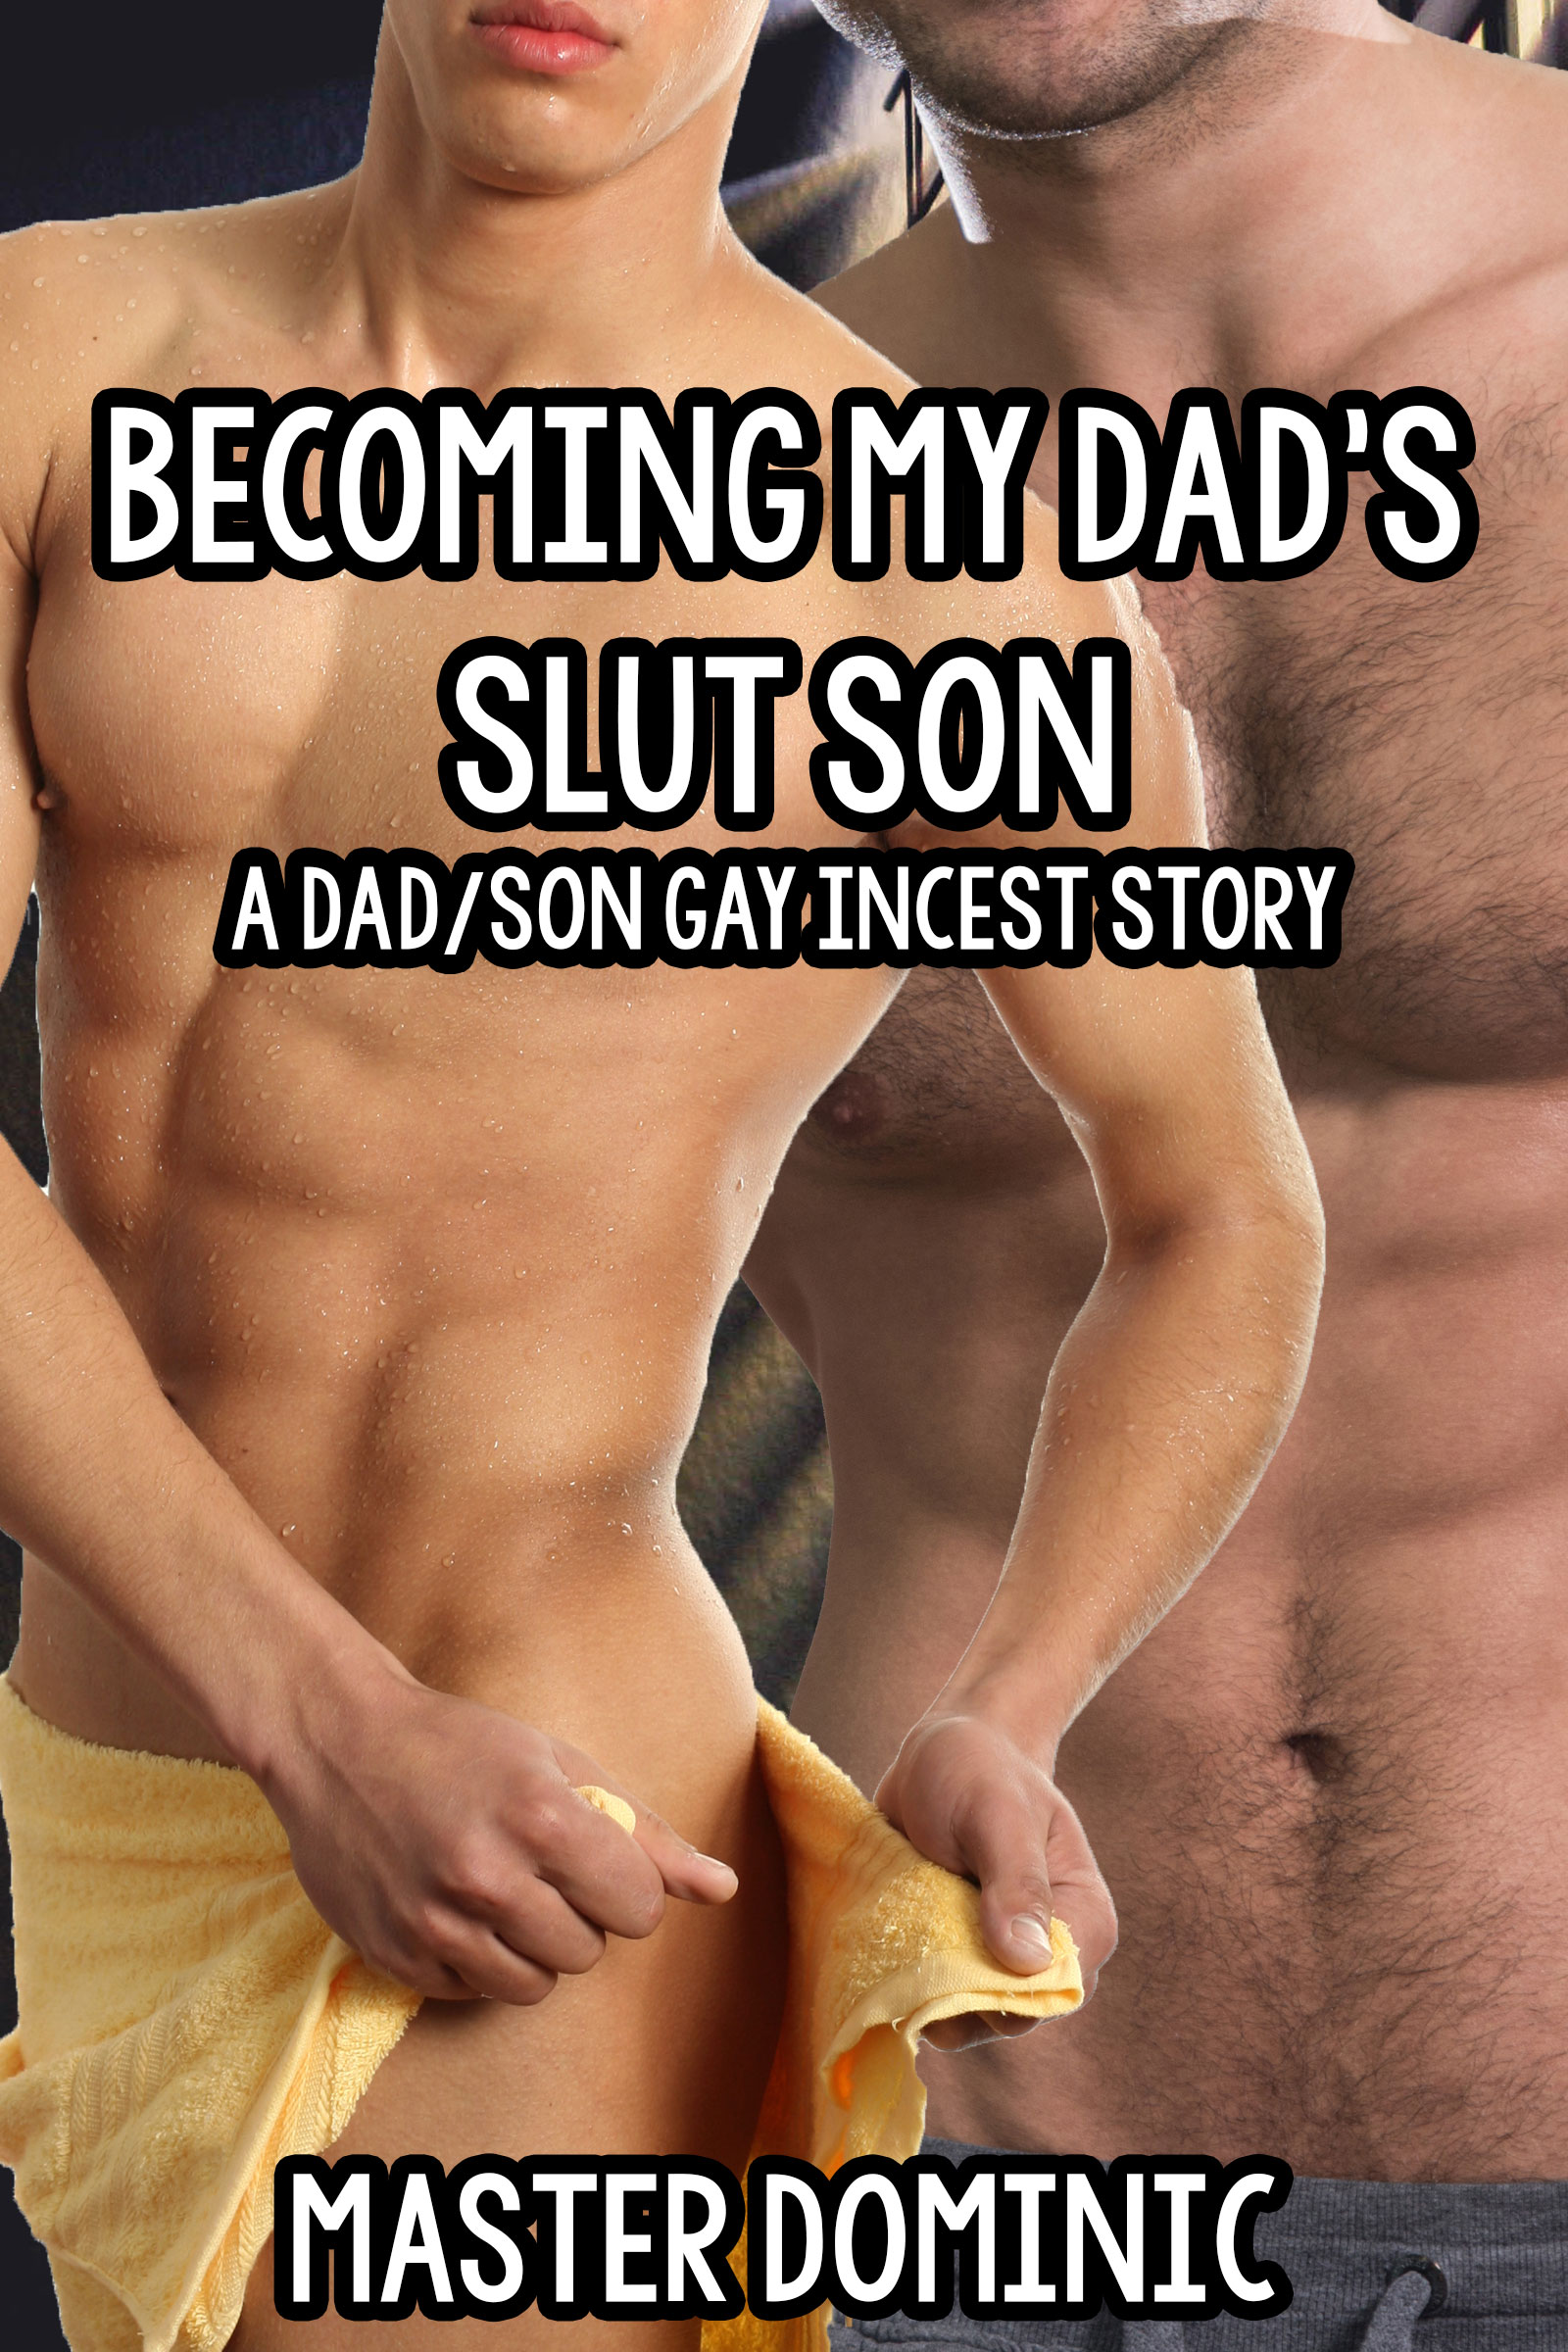 gay sex stories daddy takes son